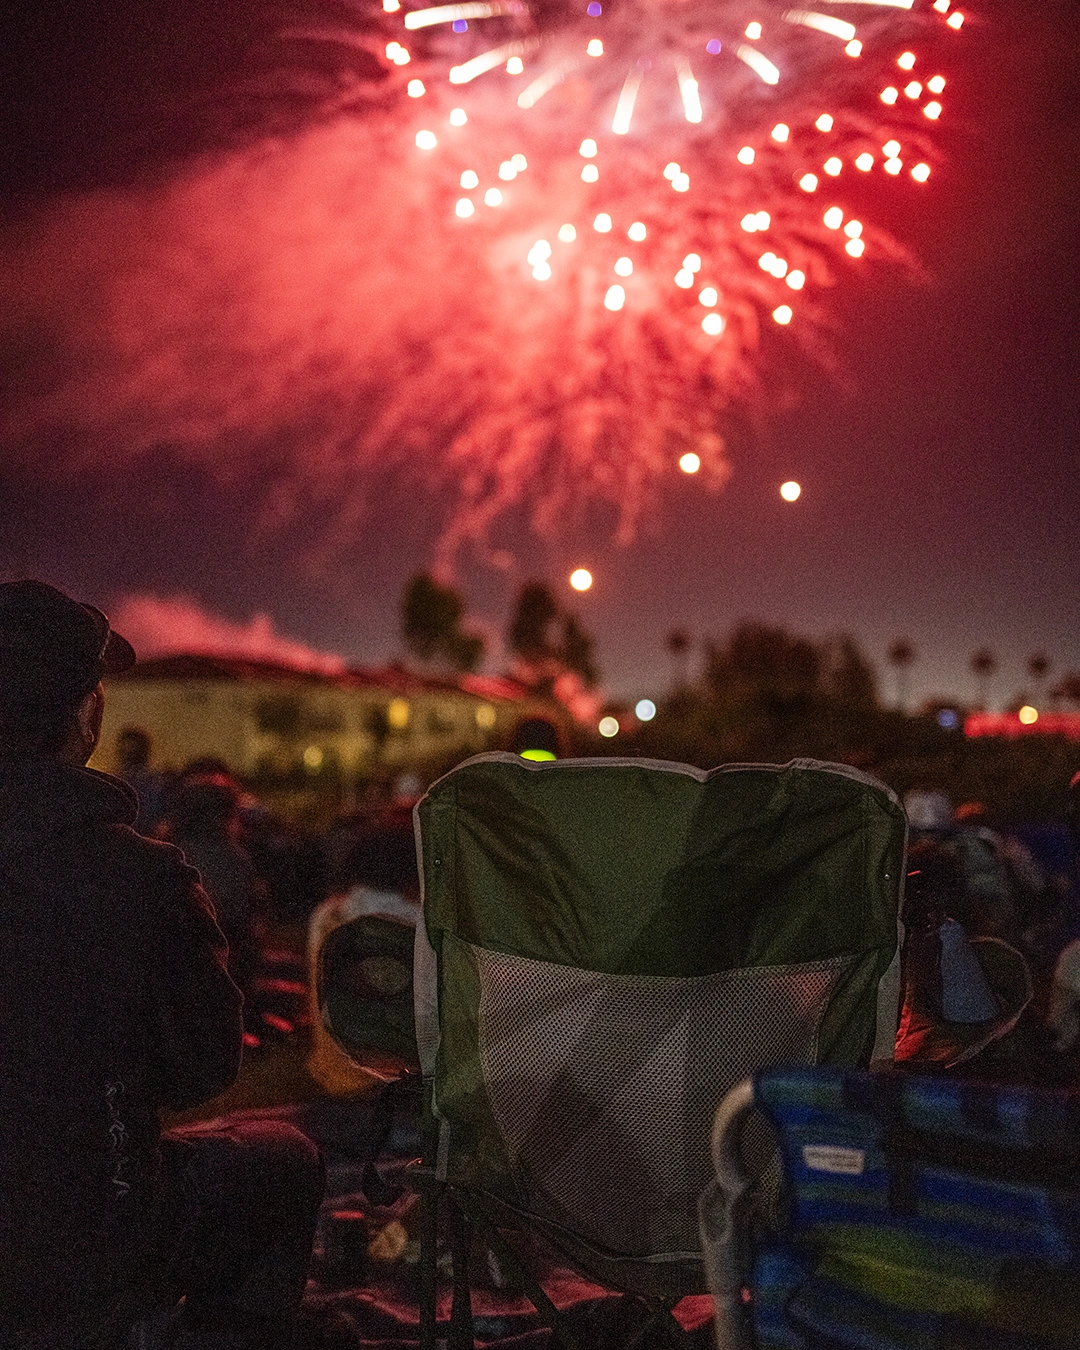 The fireworks show at Chula Vista 4th Fest event were good